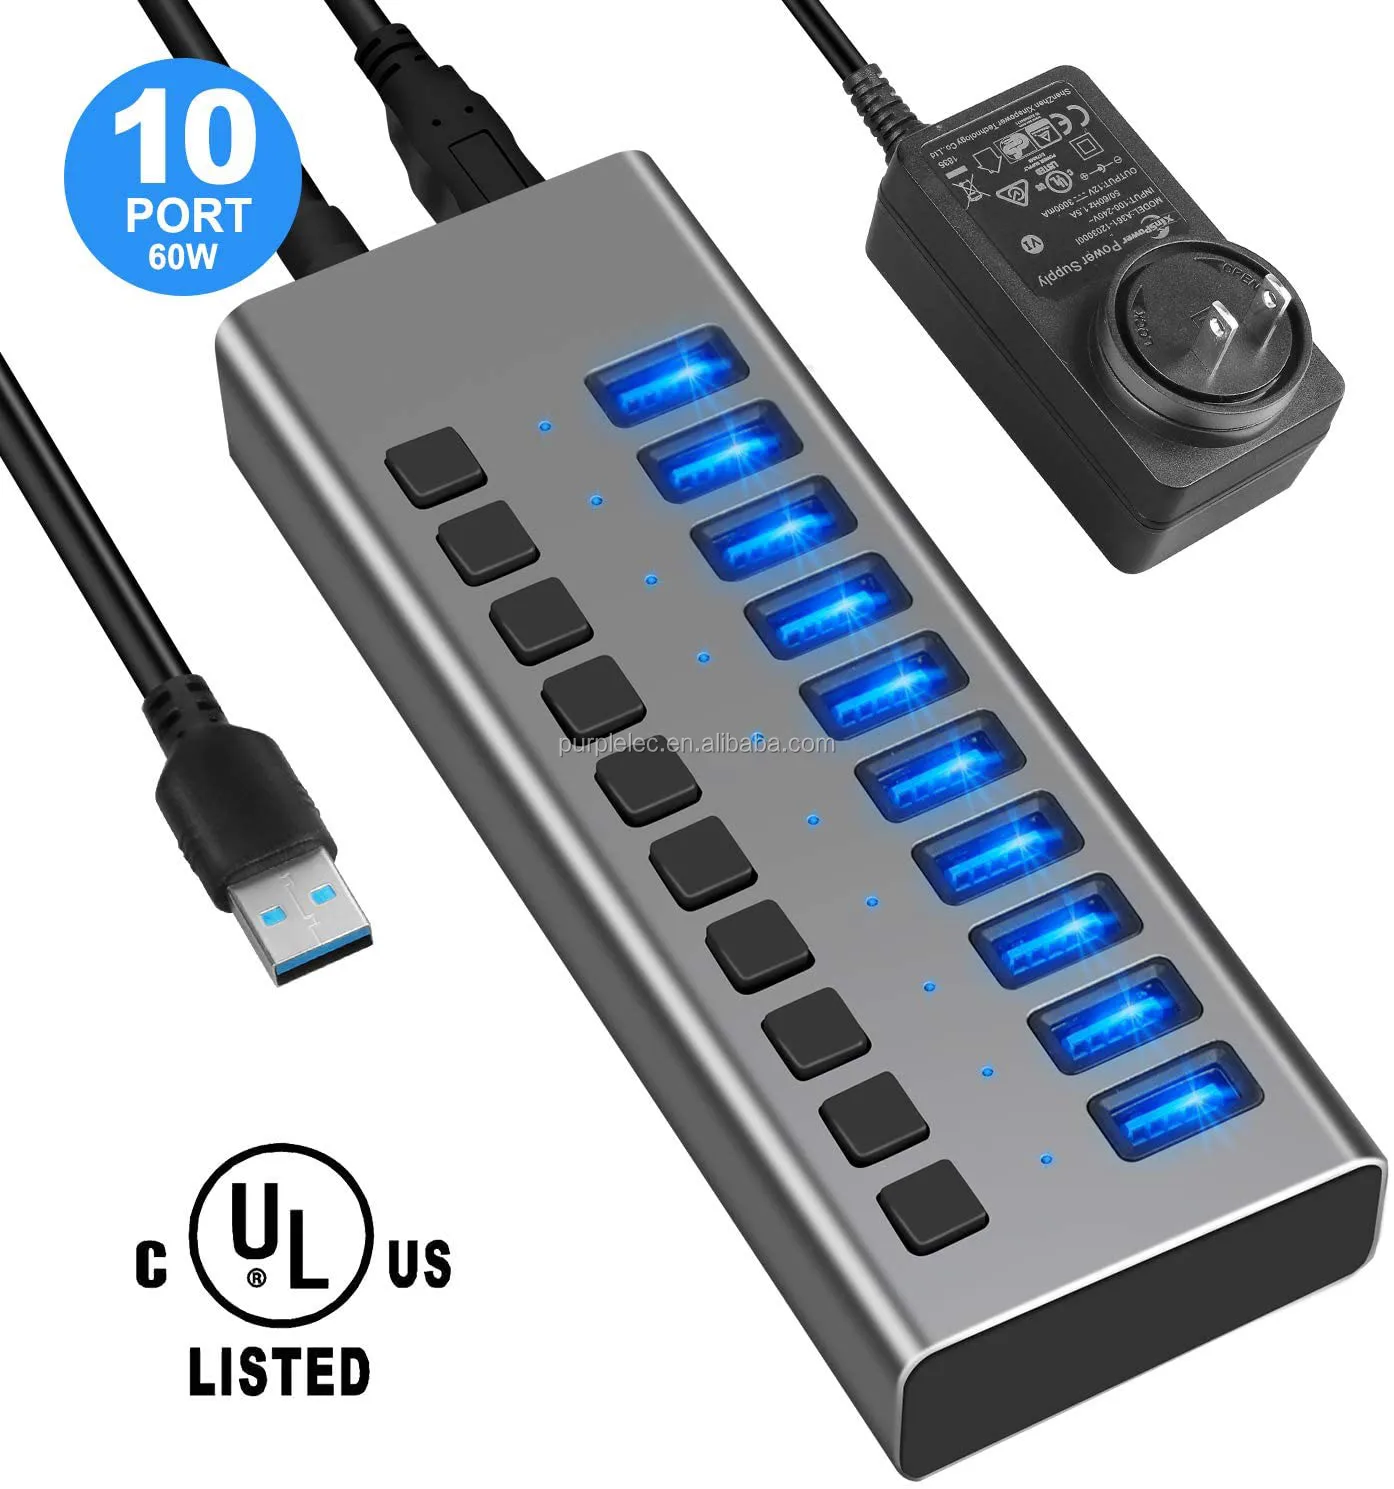 

High Quality Easy and Fast Setup 10 Ports USB Dock Hub USB 3.0 with Individual Power Switches, Black, silver, grey